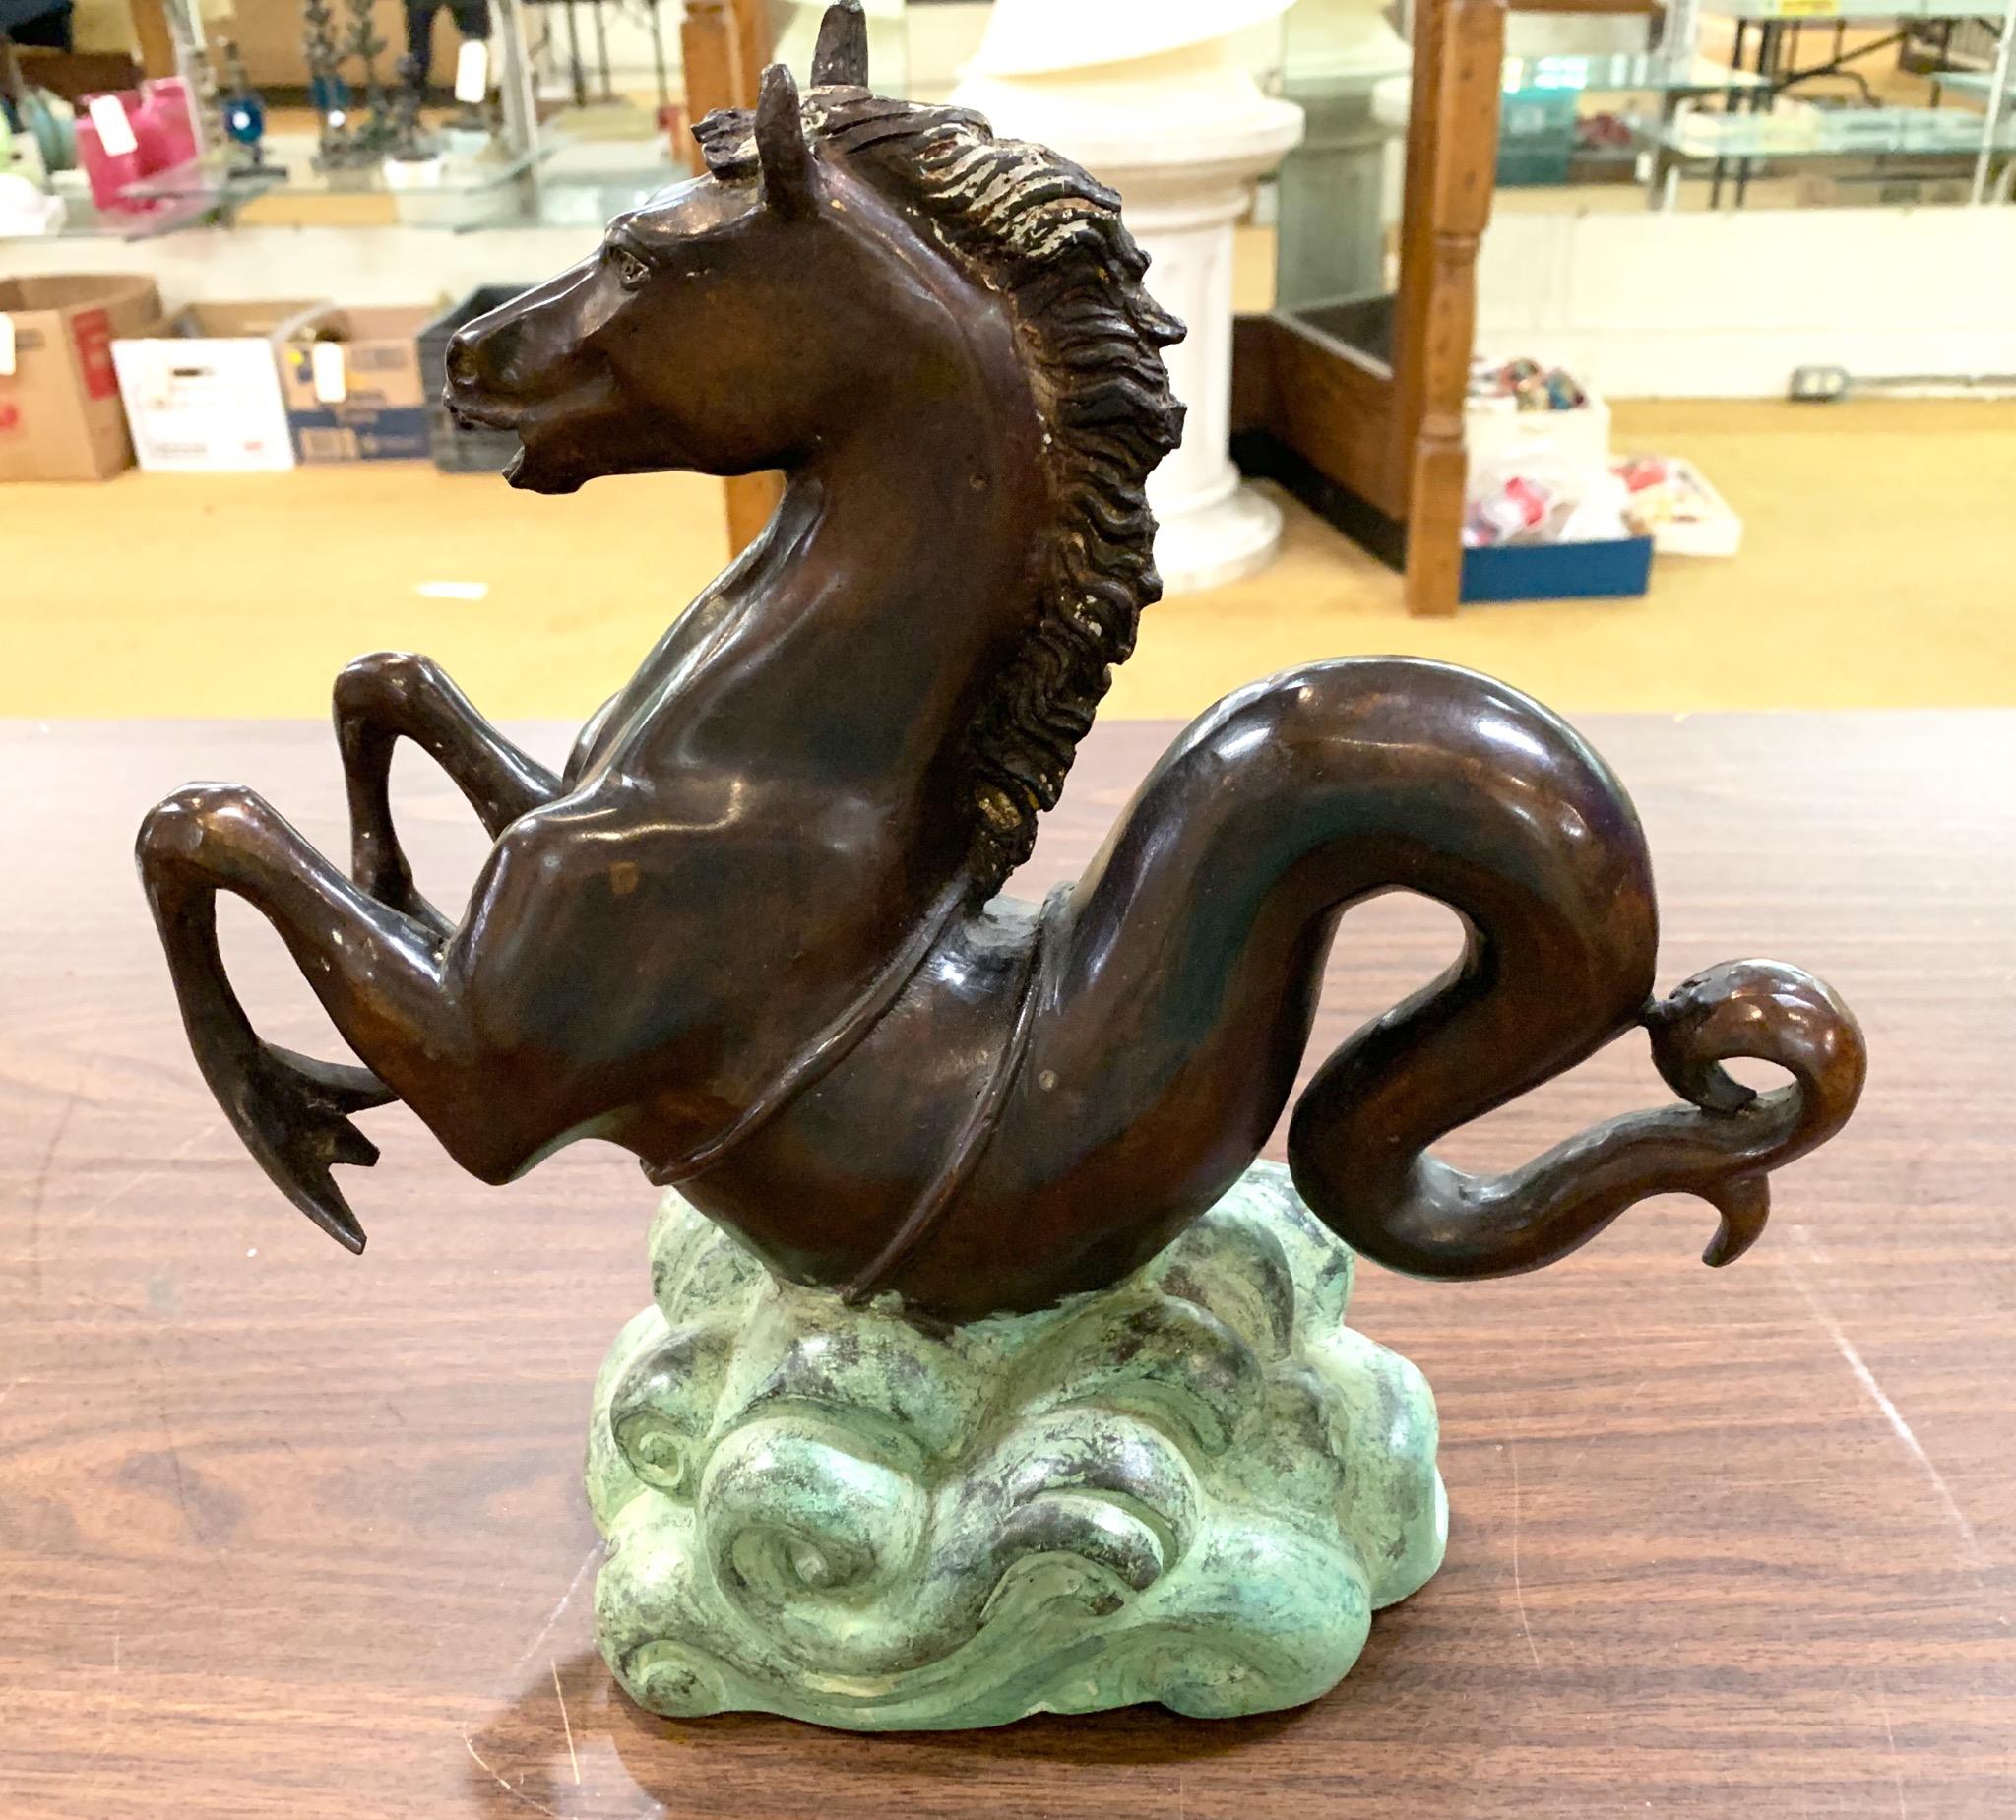 High quality brown patinated cast bronze stylized Sea Horse sculptures on verdigris sea foam bases. Would make striking bookends, table top decoration, or easily converted to lamp bases. Unsigned, but likely Italian, circa 1920s.